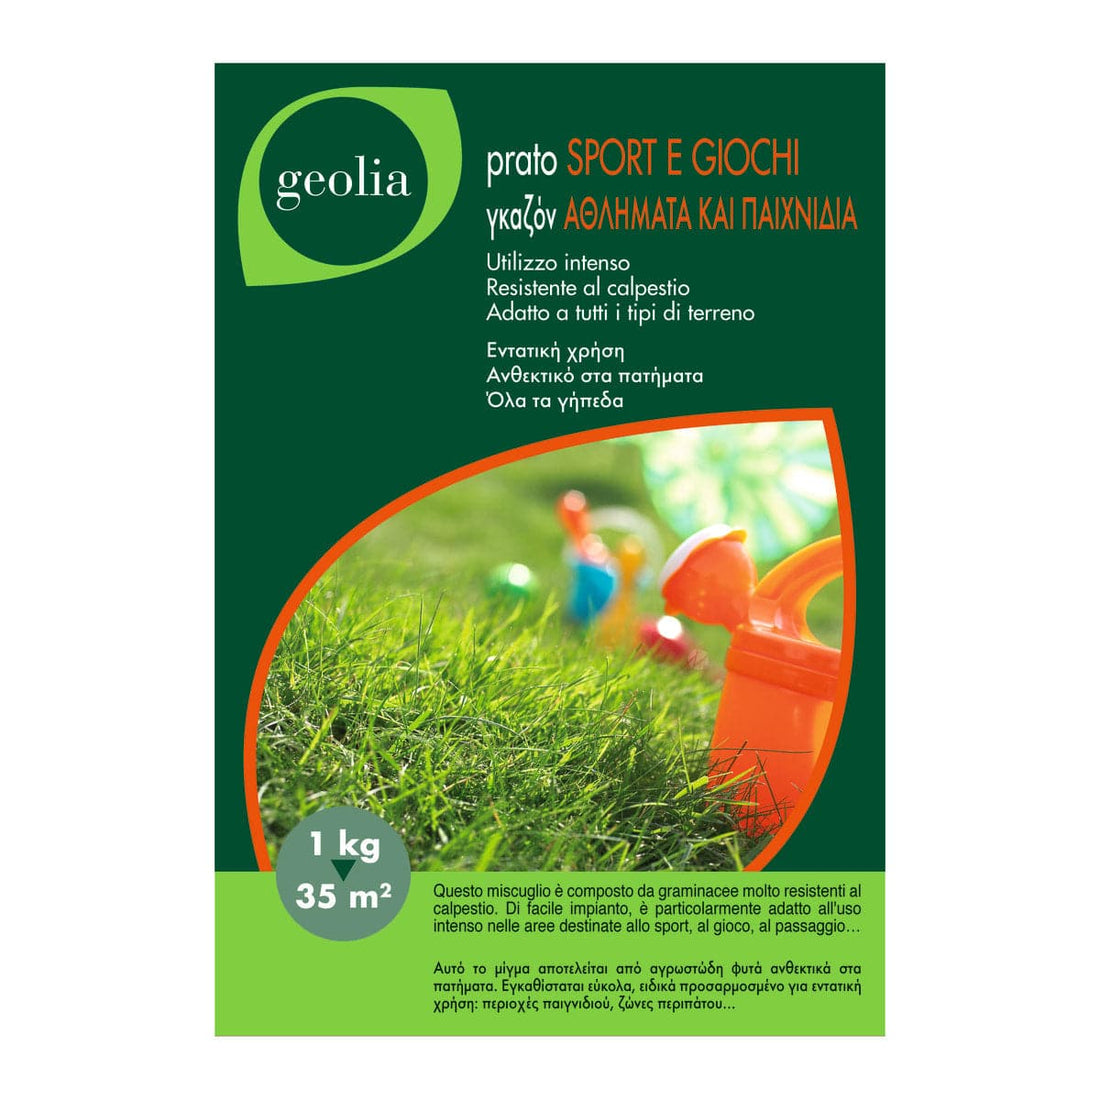 SPORTS AND GAMES LAWN SEEDS 1 KG GEOLIA - best price from Maltashopper.com BR510540015